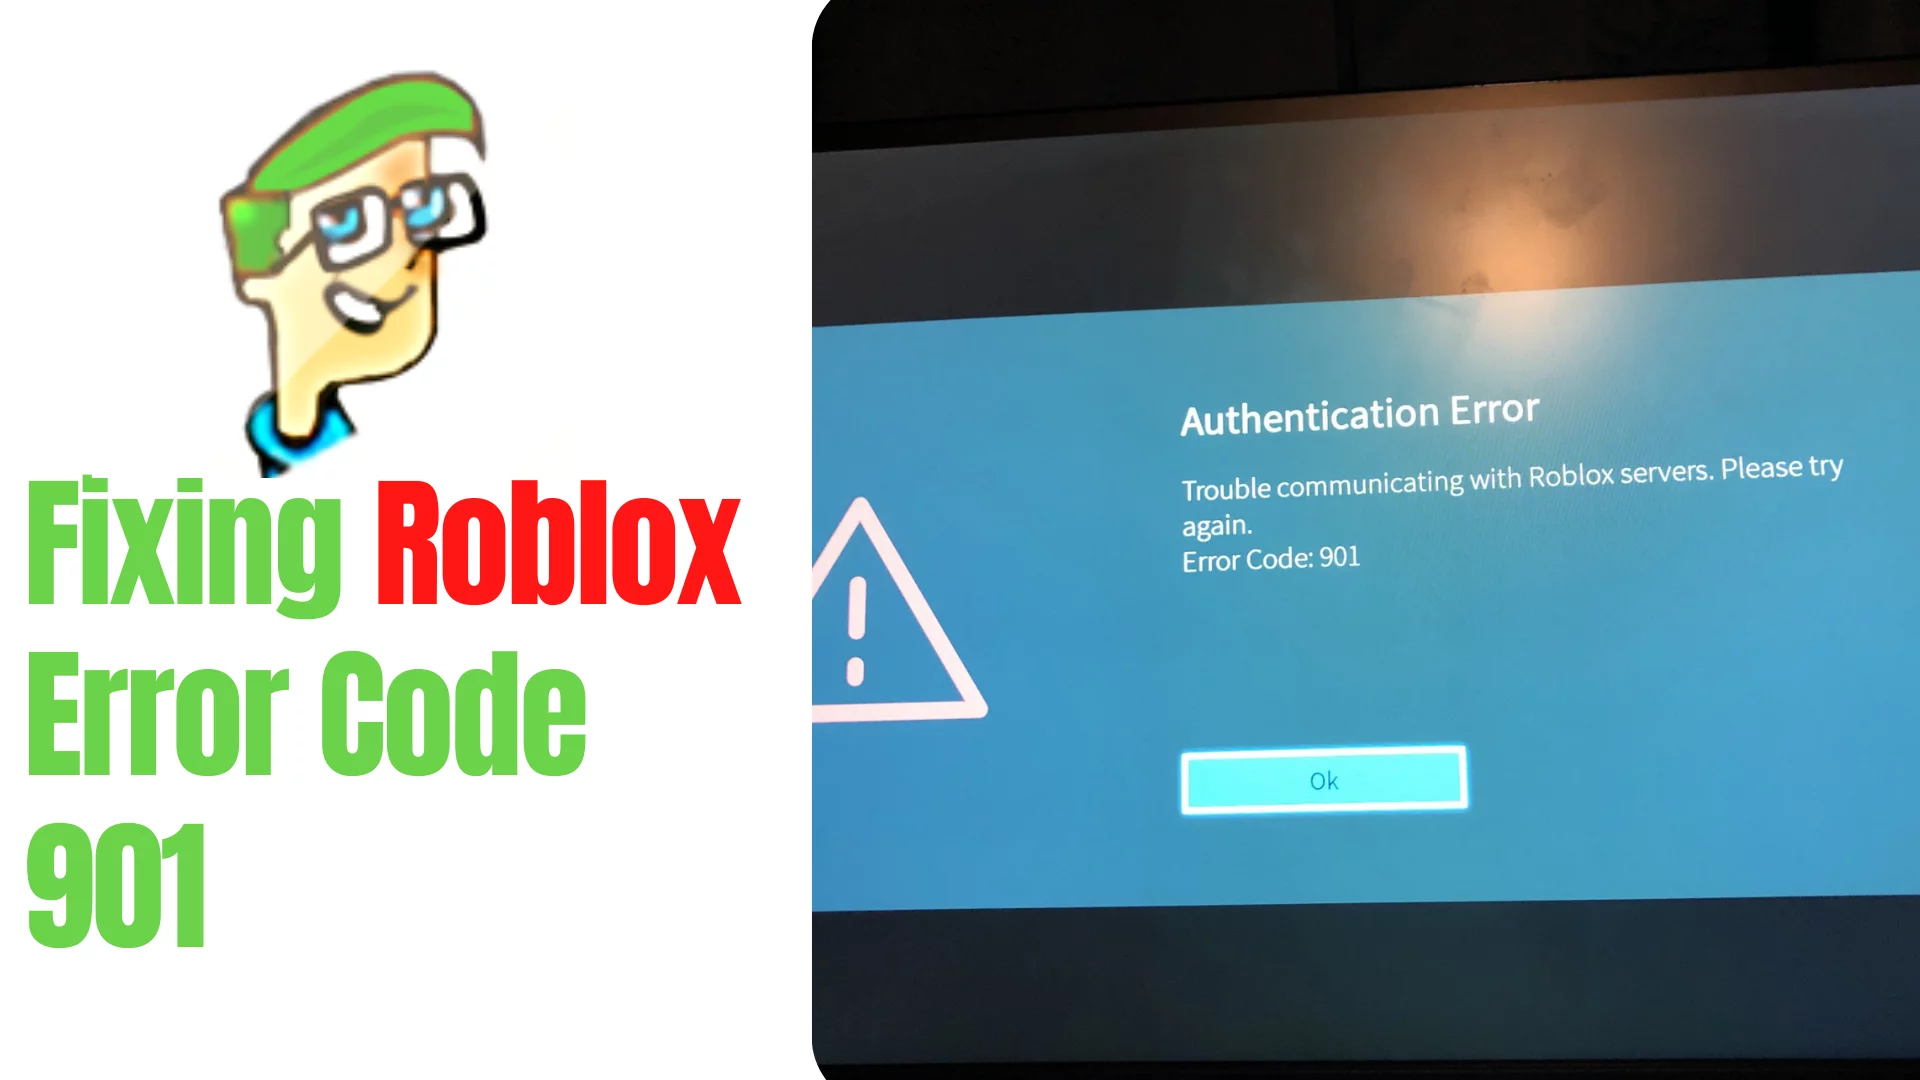 How to Fix Roblox Error Code 901 on Xbox & Windows 7/8/10/11? - MiniTool  Partition Wizard